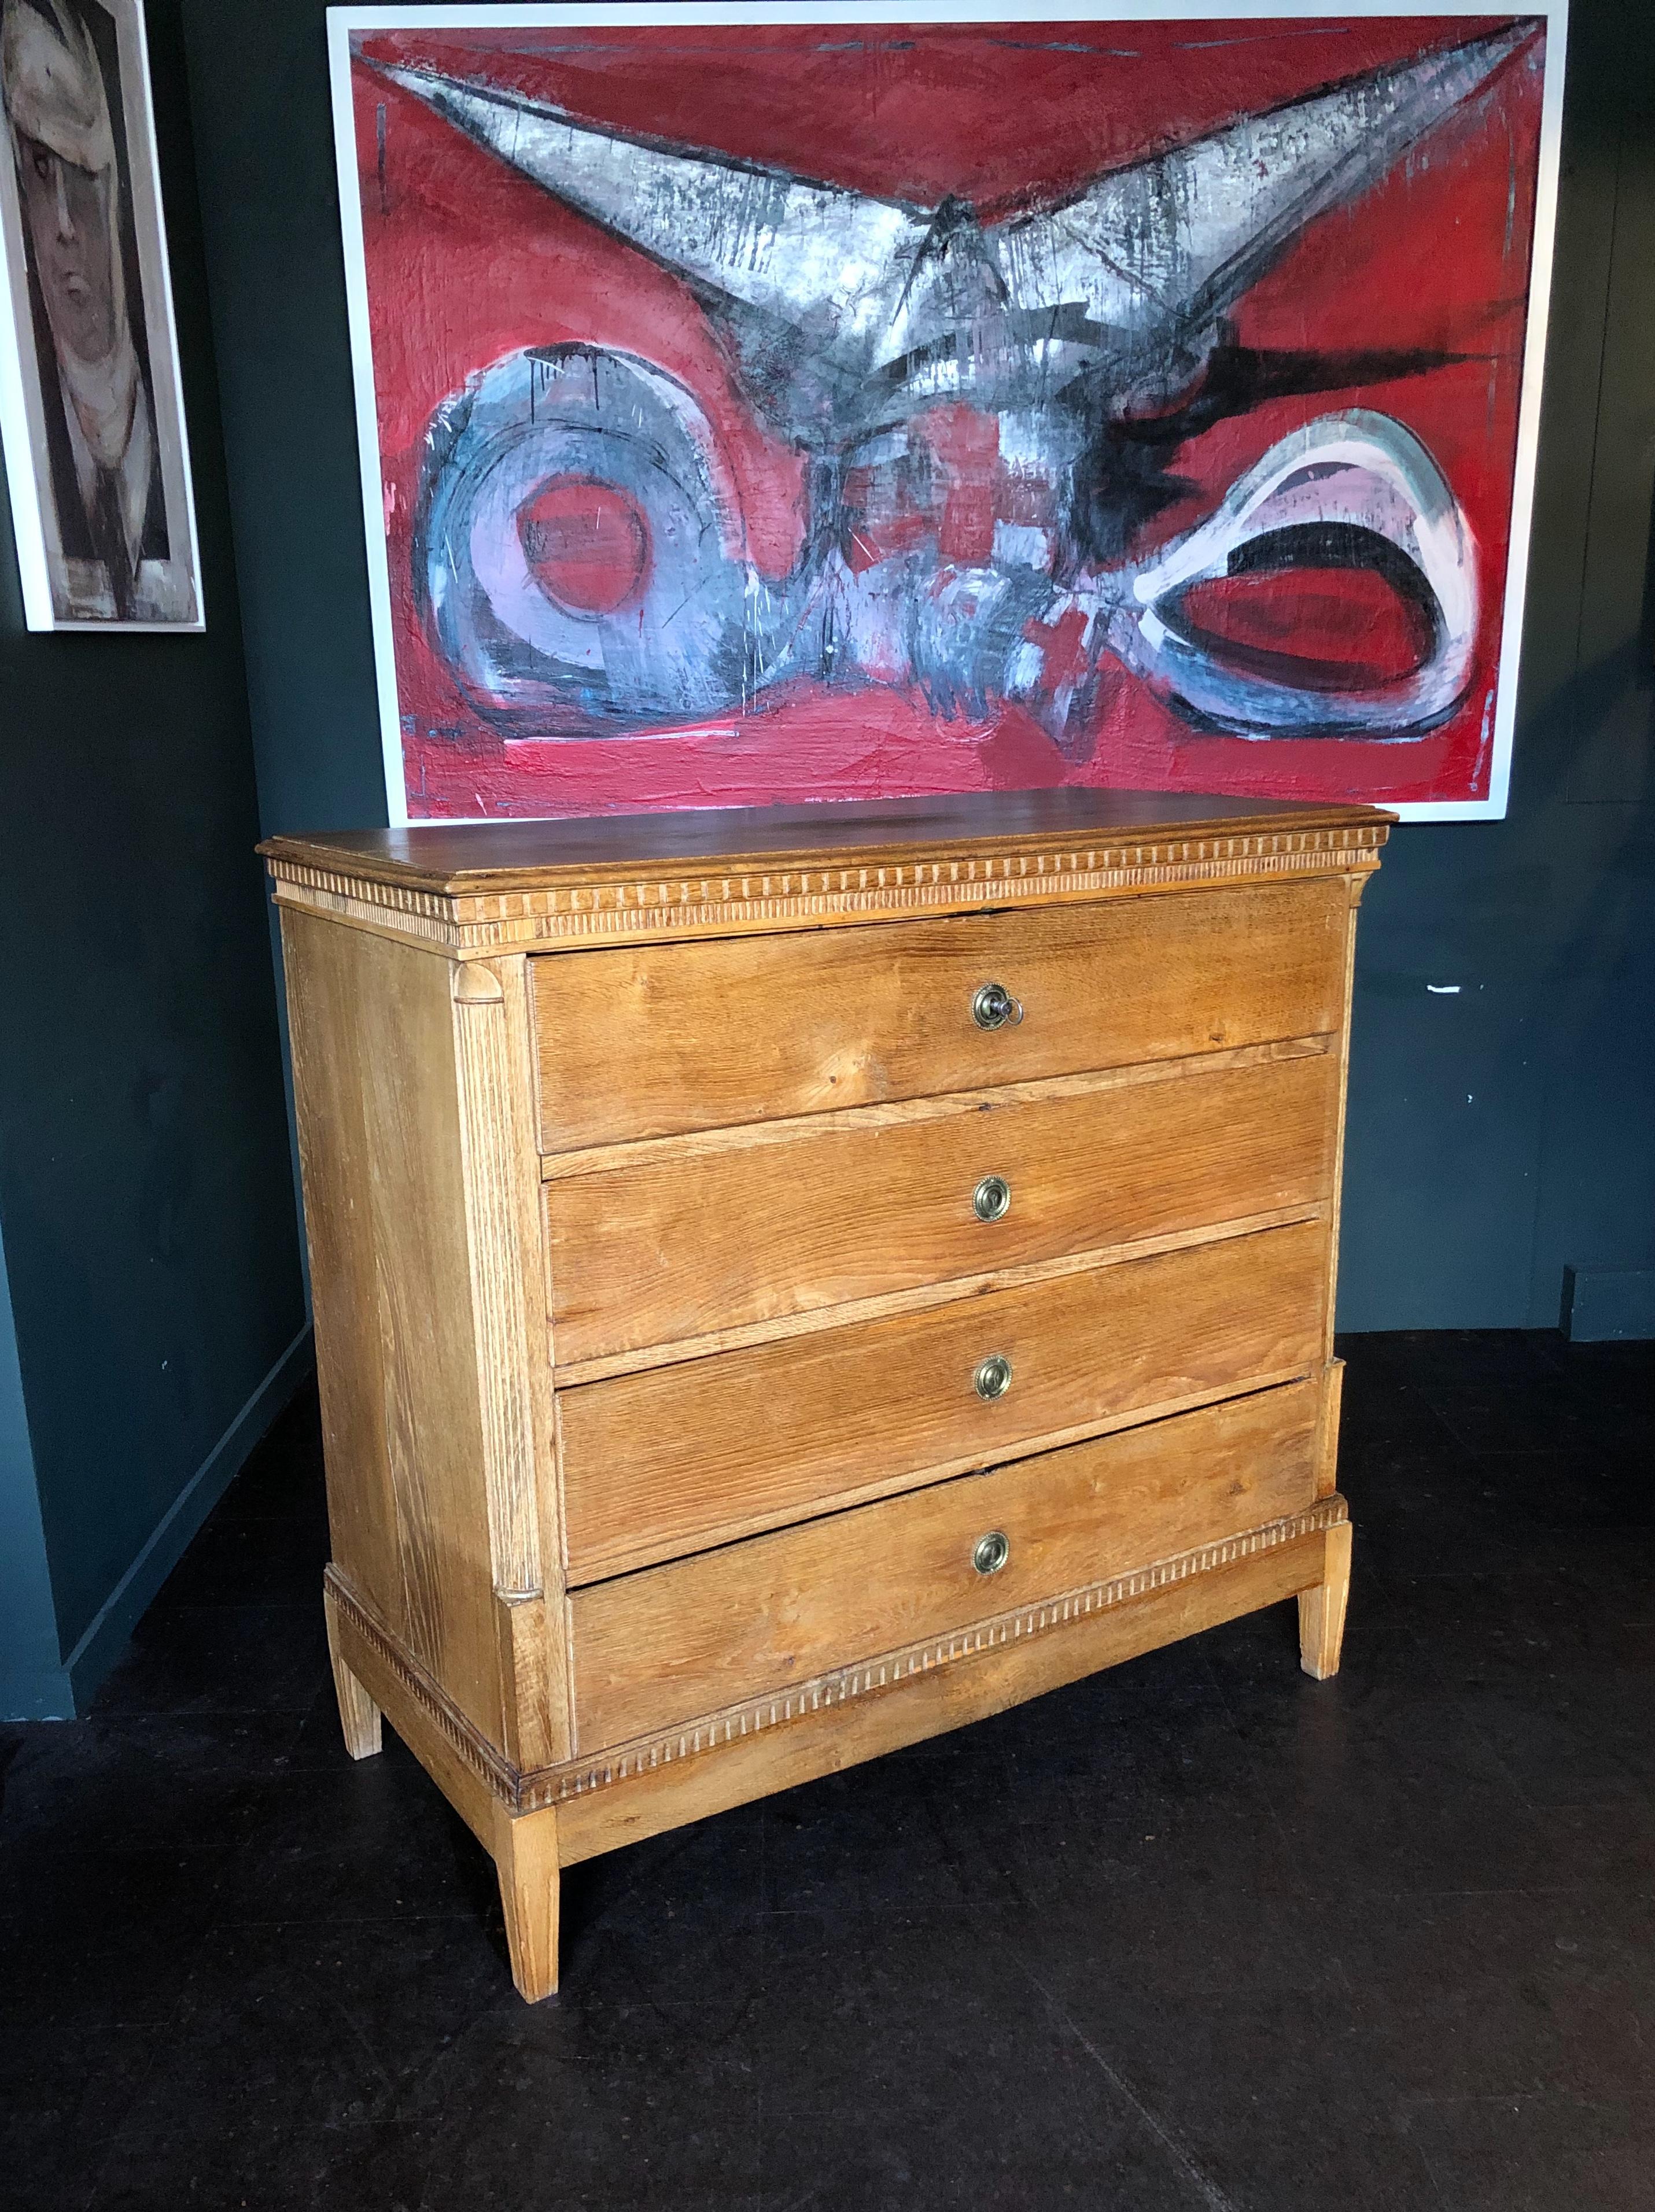 An enormous Scandinavian oak chest of drawers. W 120, D 59, H 116cm. Dating from the Louis XVI period, circa 1800. A wonderful architectural statement piece of furniture and very practical for storage. Original key and locks.
Lovely aged oak which